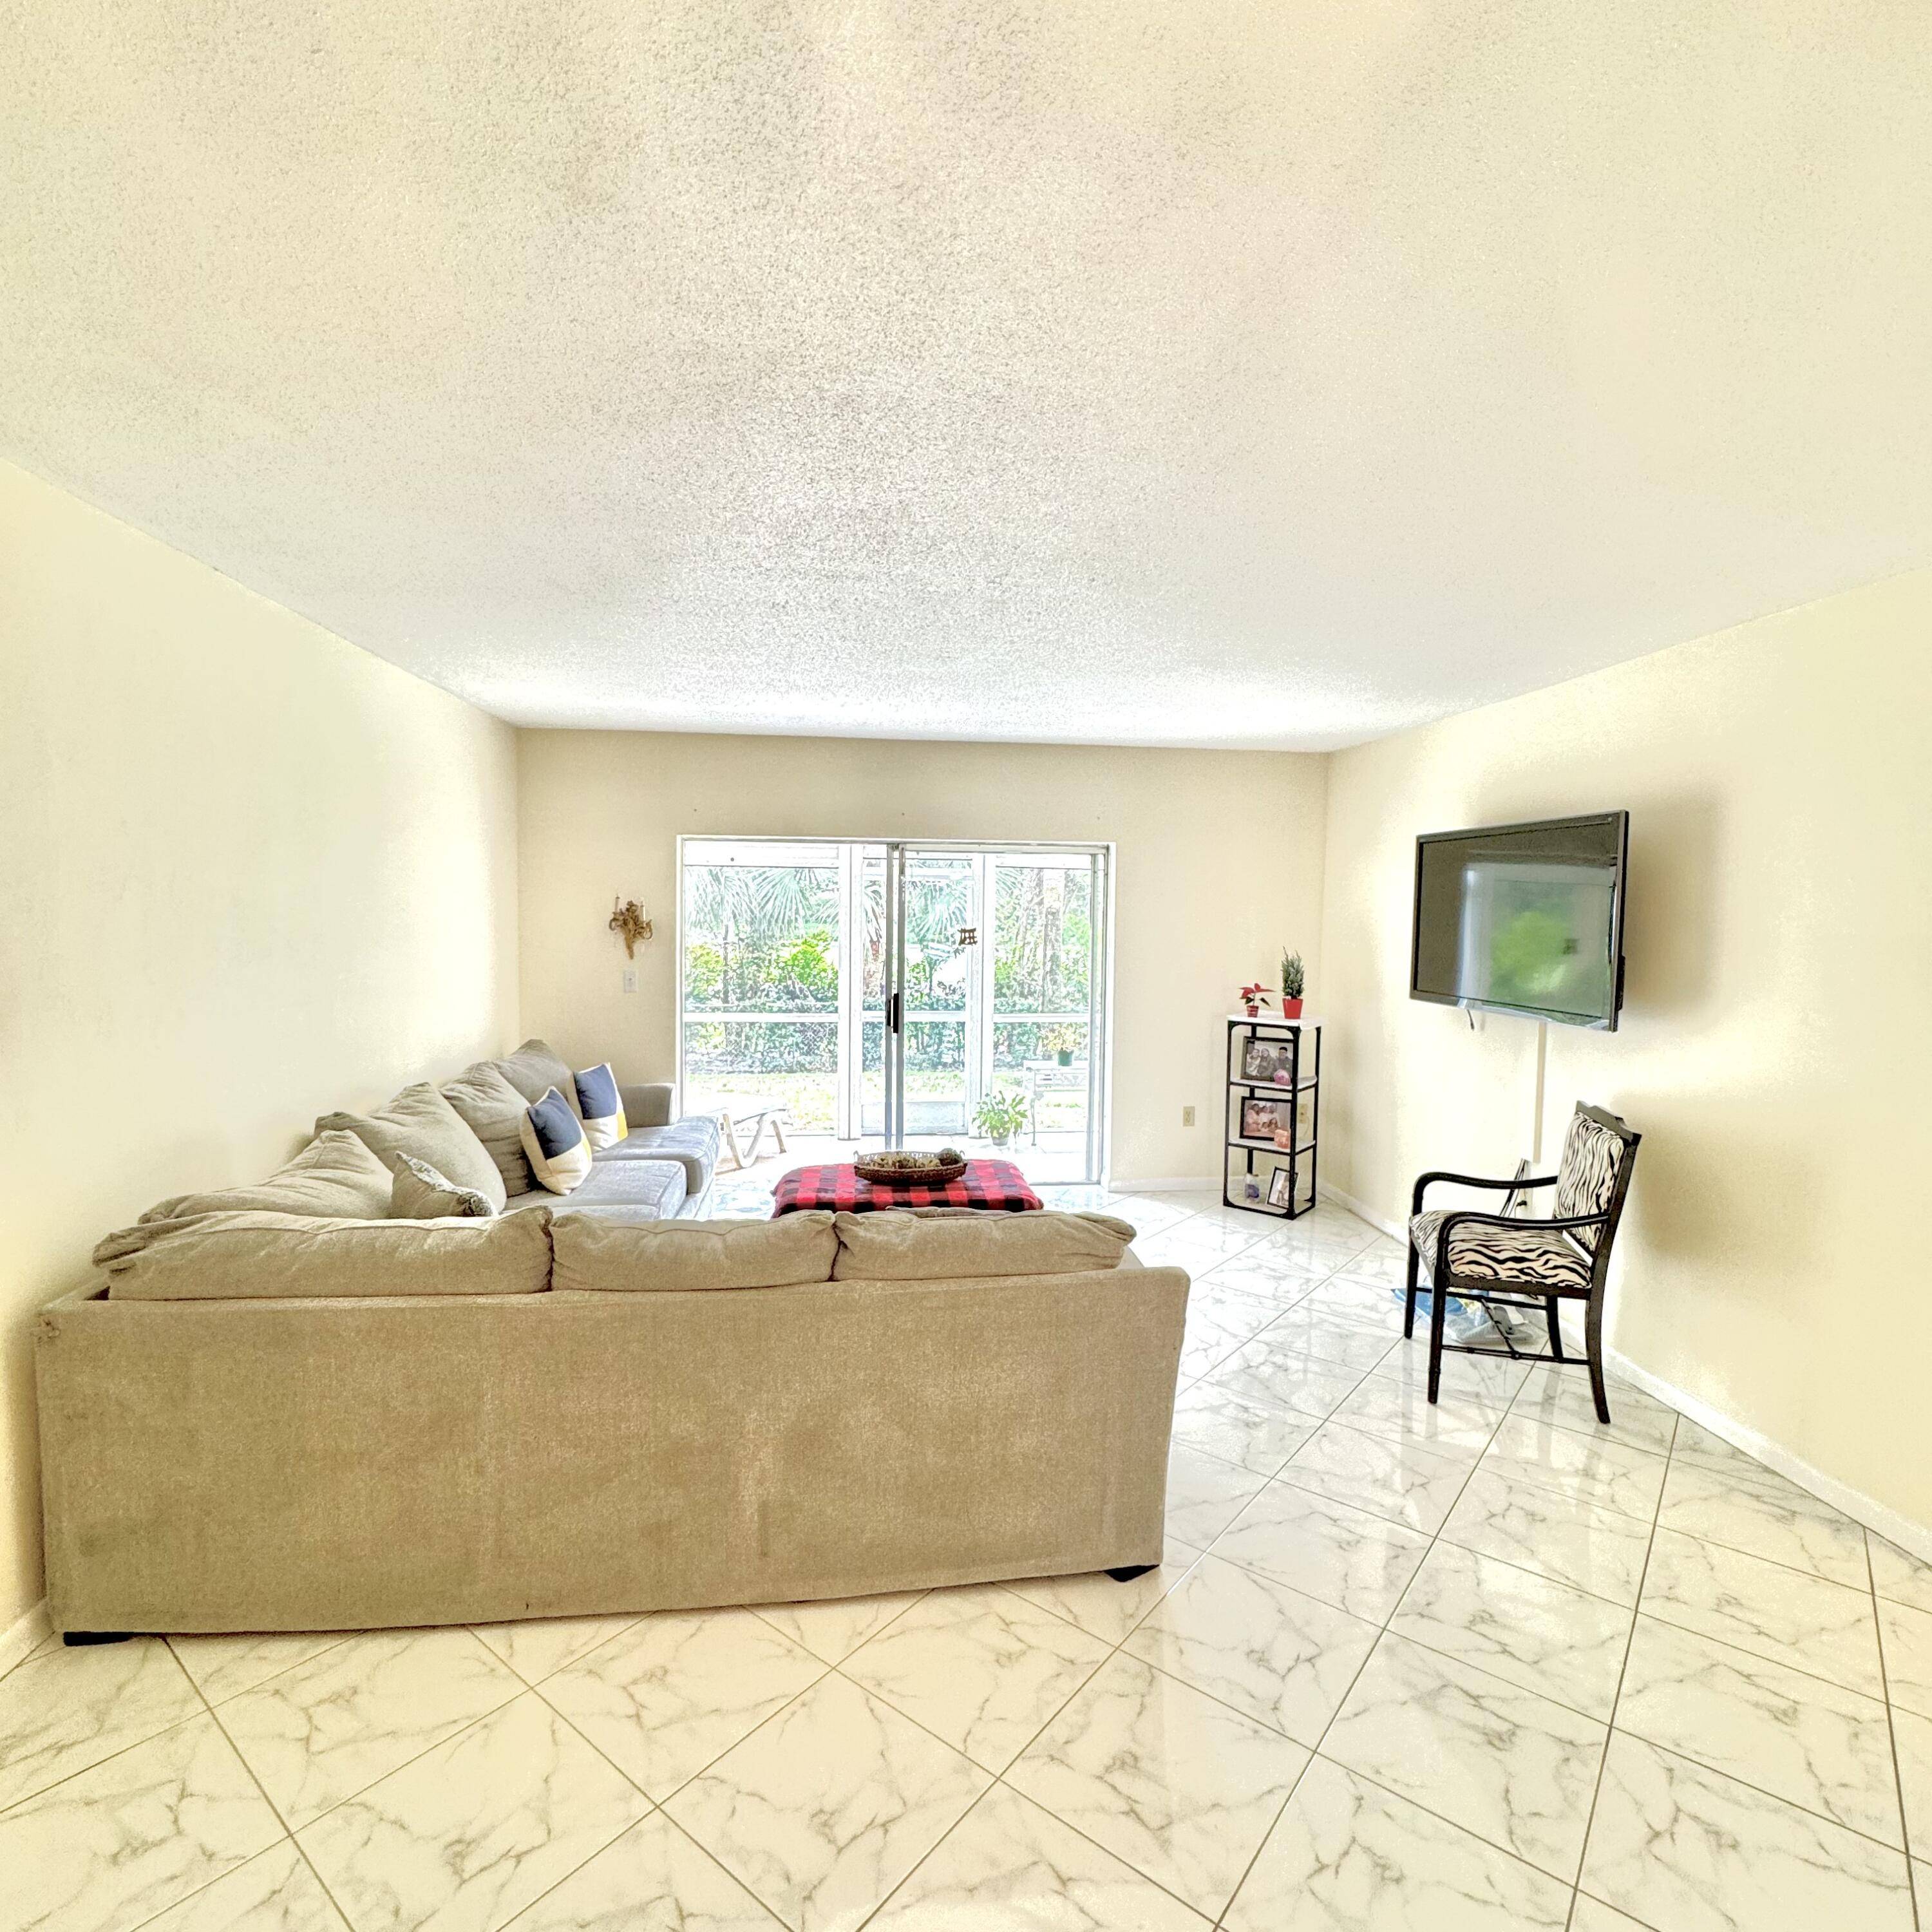 Location ! Location ! Best priced condo in Downtown Boca Raton !